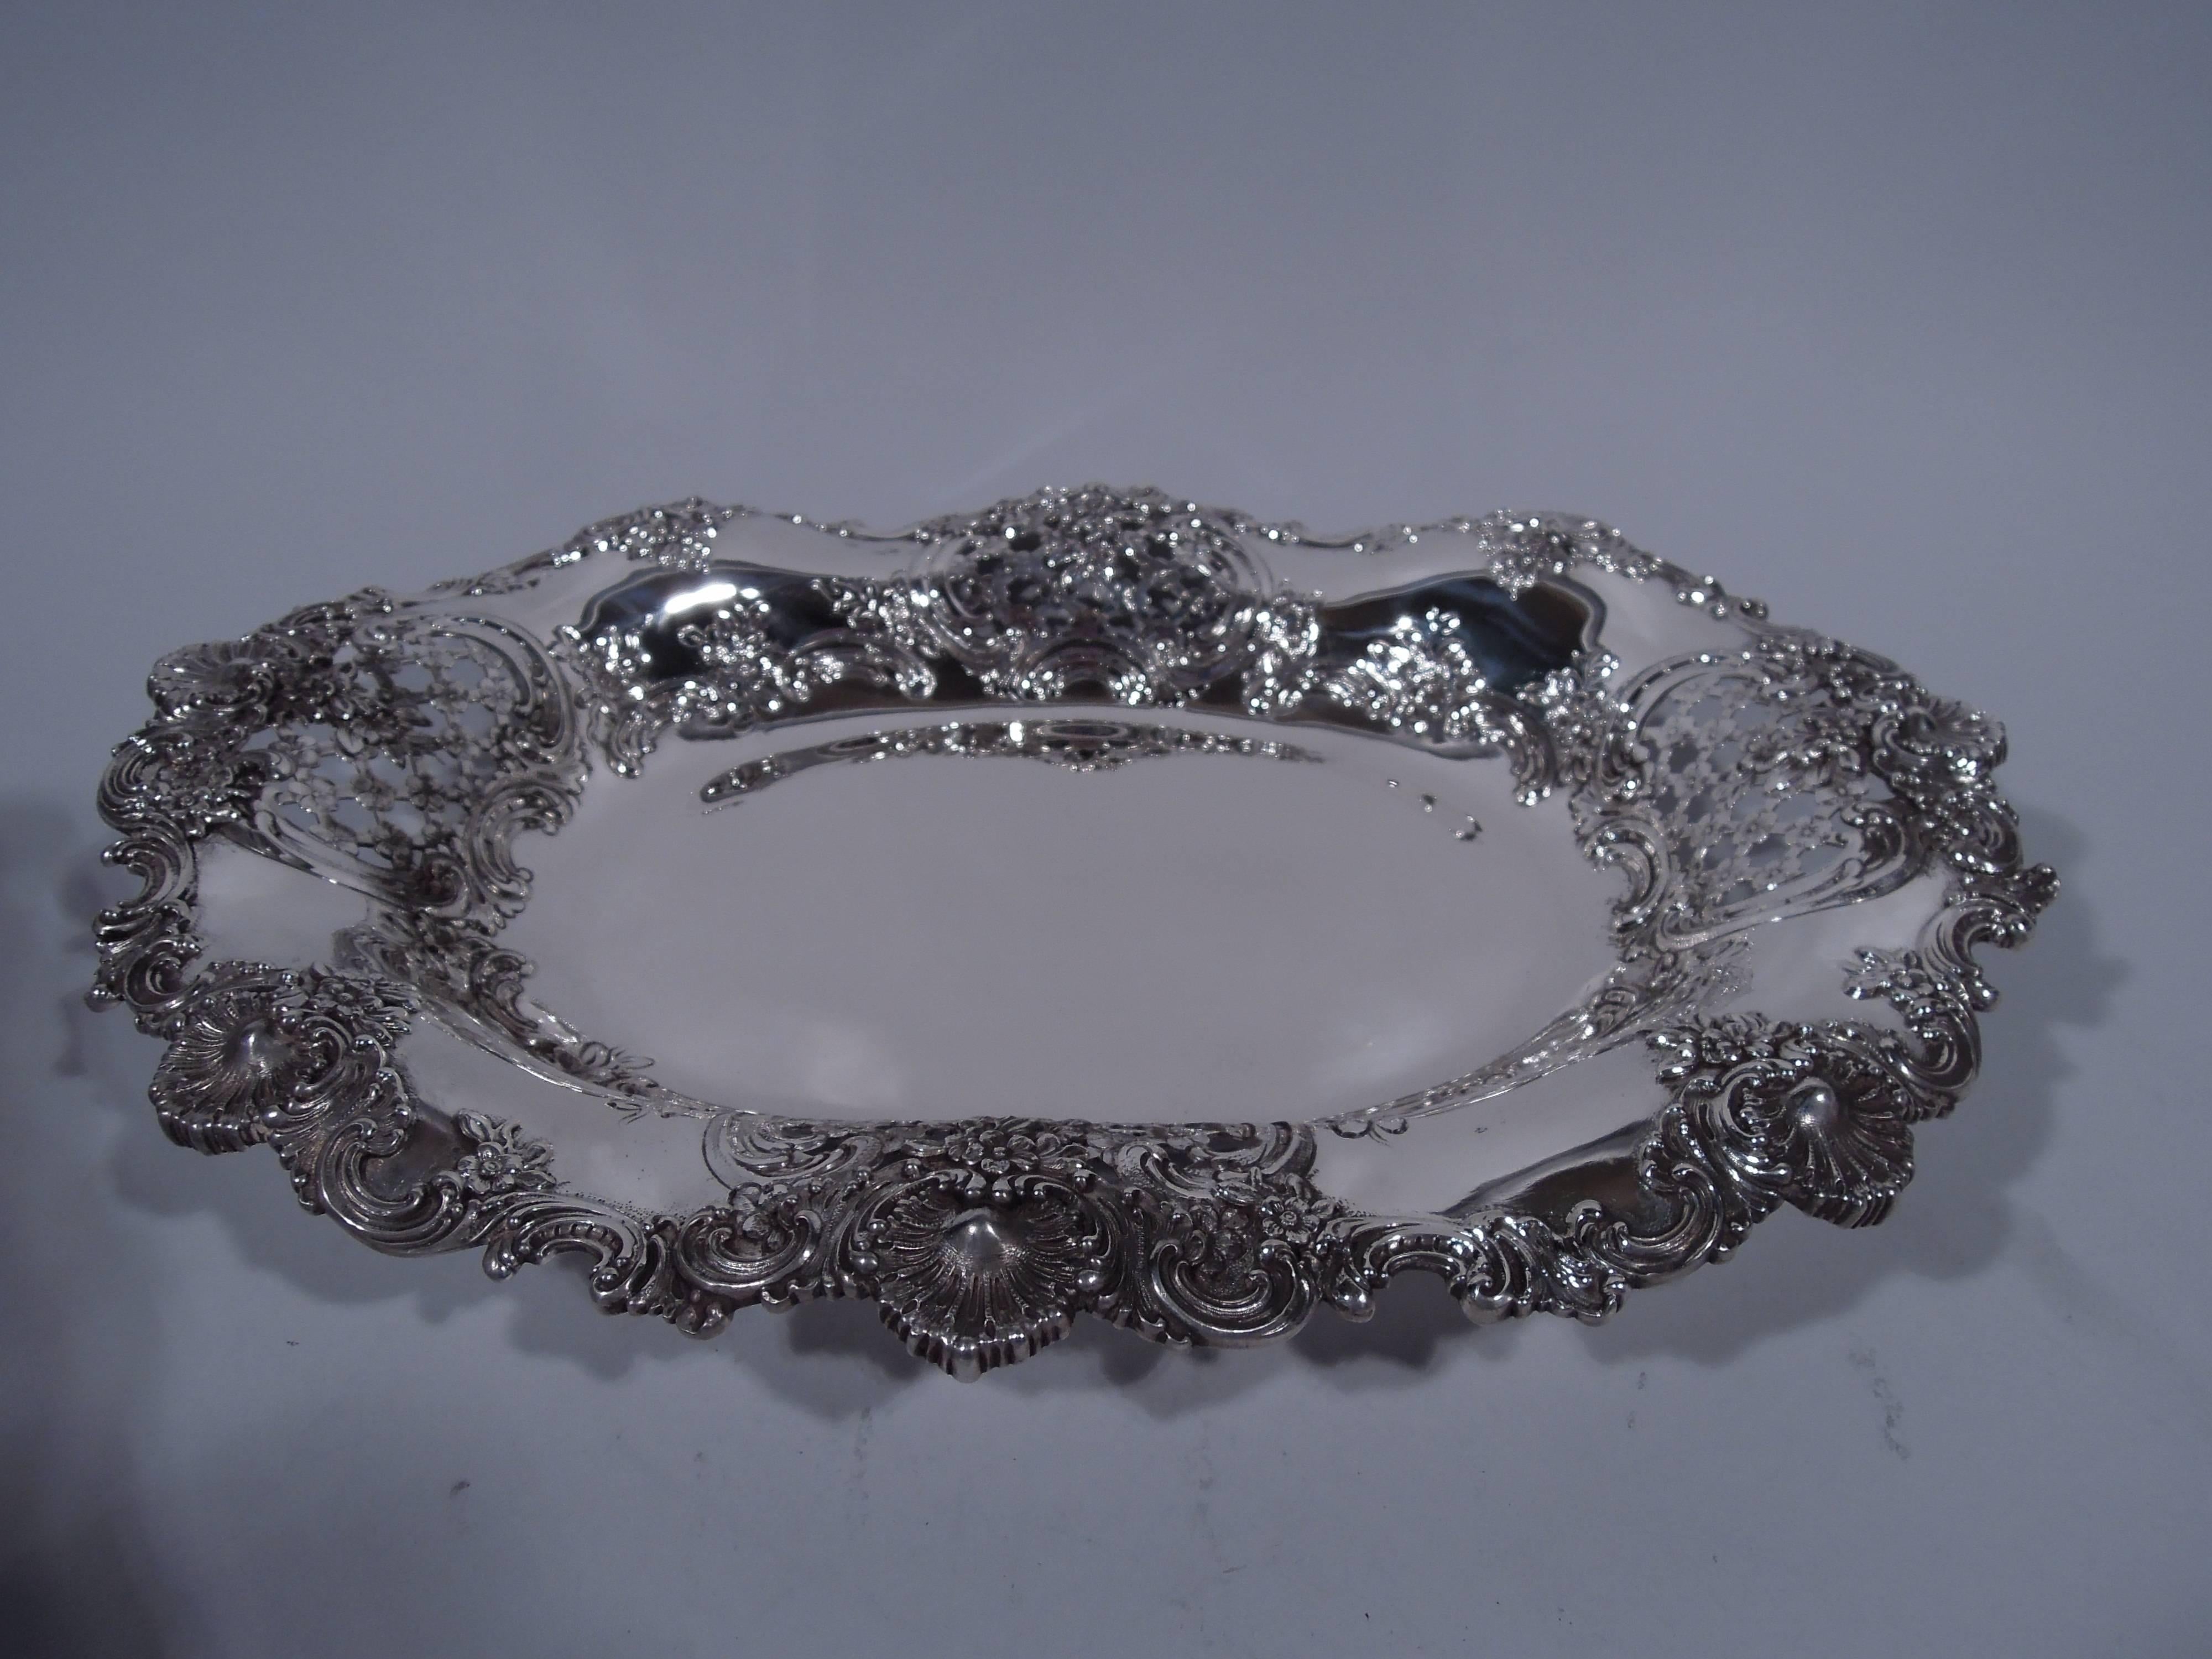 Sterling silver bowl. Made by Tiffany & Co. in New York, circa 1892. Solid oval well and flared wavy rim. Chased flowers and scrolls, and pierced floral lattice. Rim has applied scrolls, flowers, and scallop shells. A great piece of the fancy stuff.